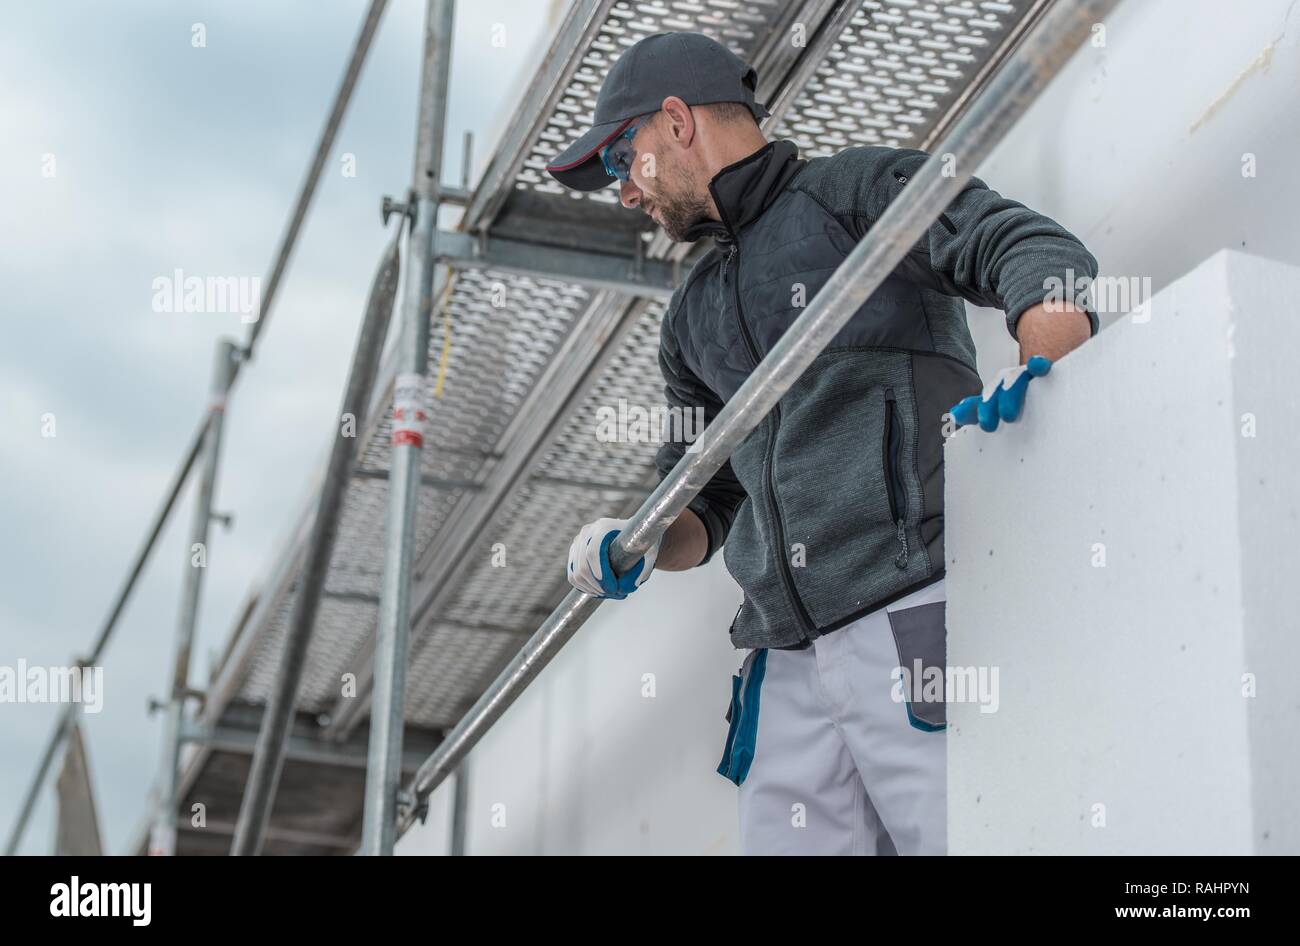 Building Insulating From Scaffolding. Caucasian Construction Worker with Insulation Material in Hands. Stock Photo